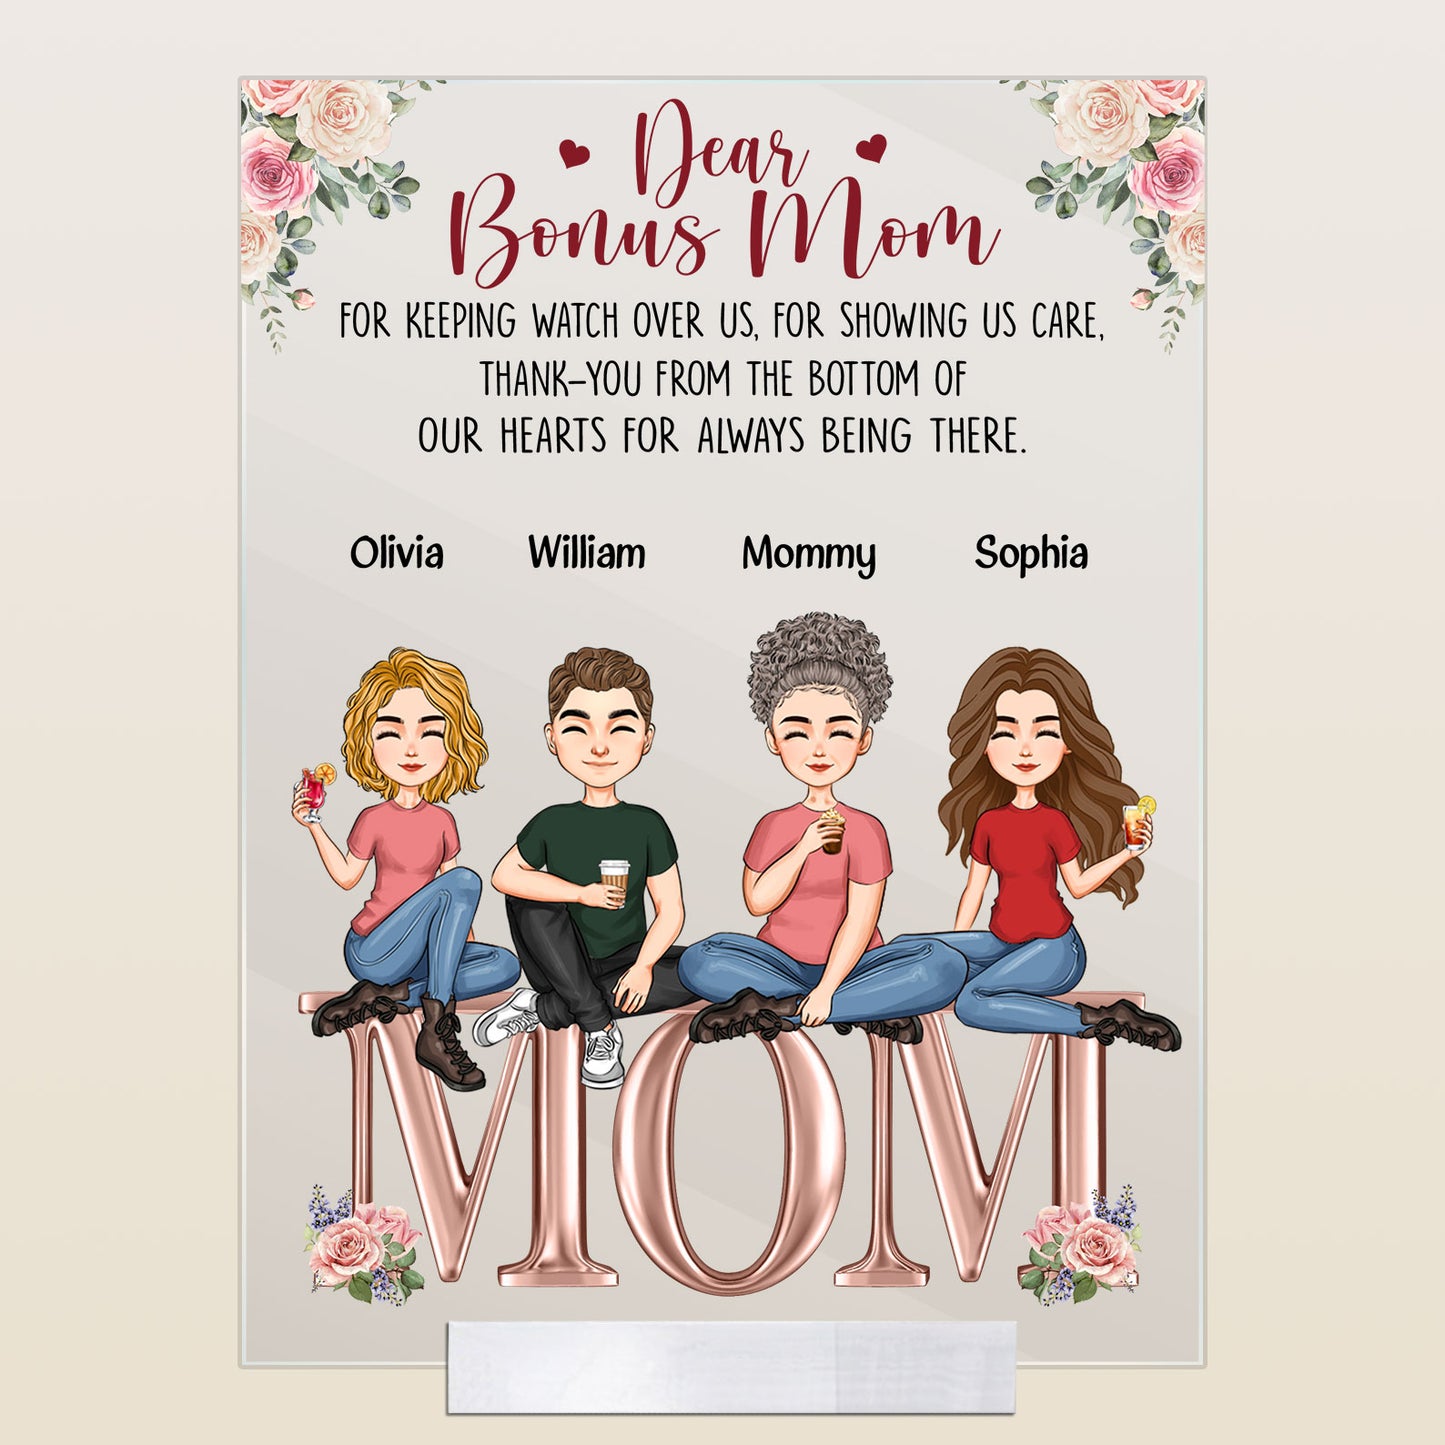 Dear Bonus Mom Thank You For Being There - Personalized Acrylic Plaque